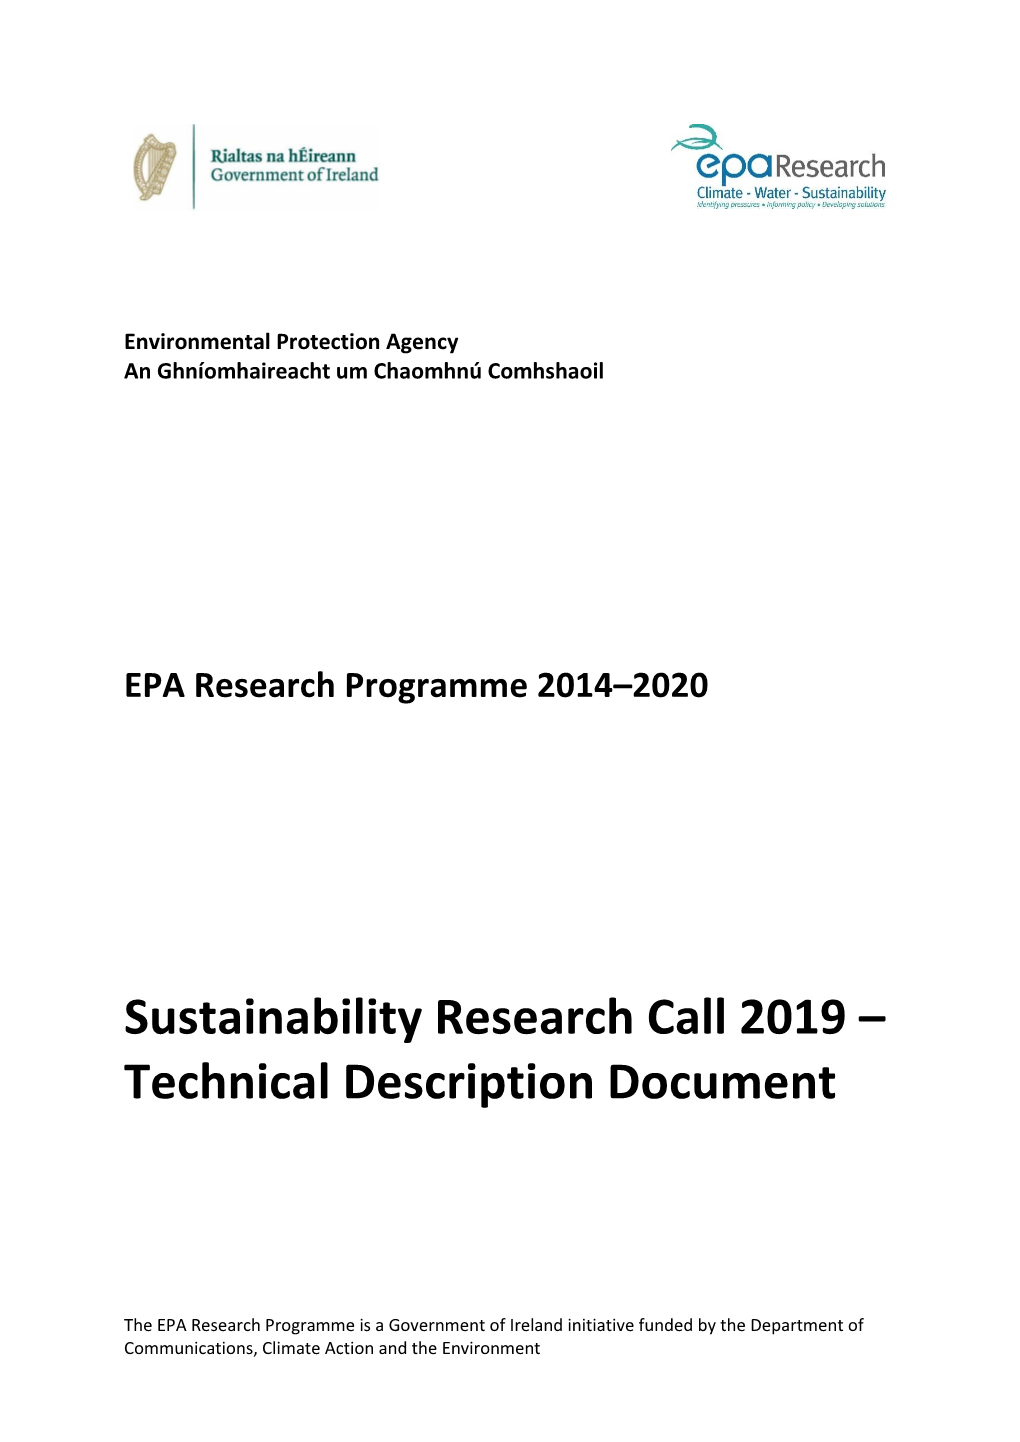 Sustainability Research Call 2019 – Technical Description Document